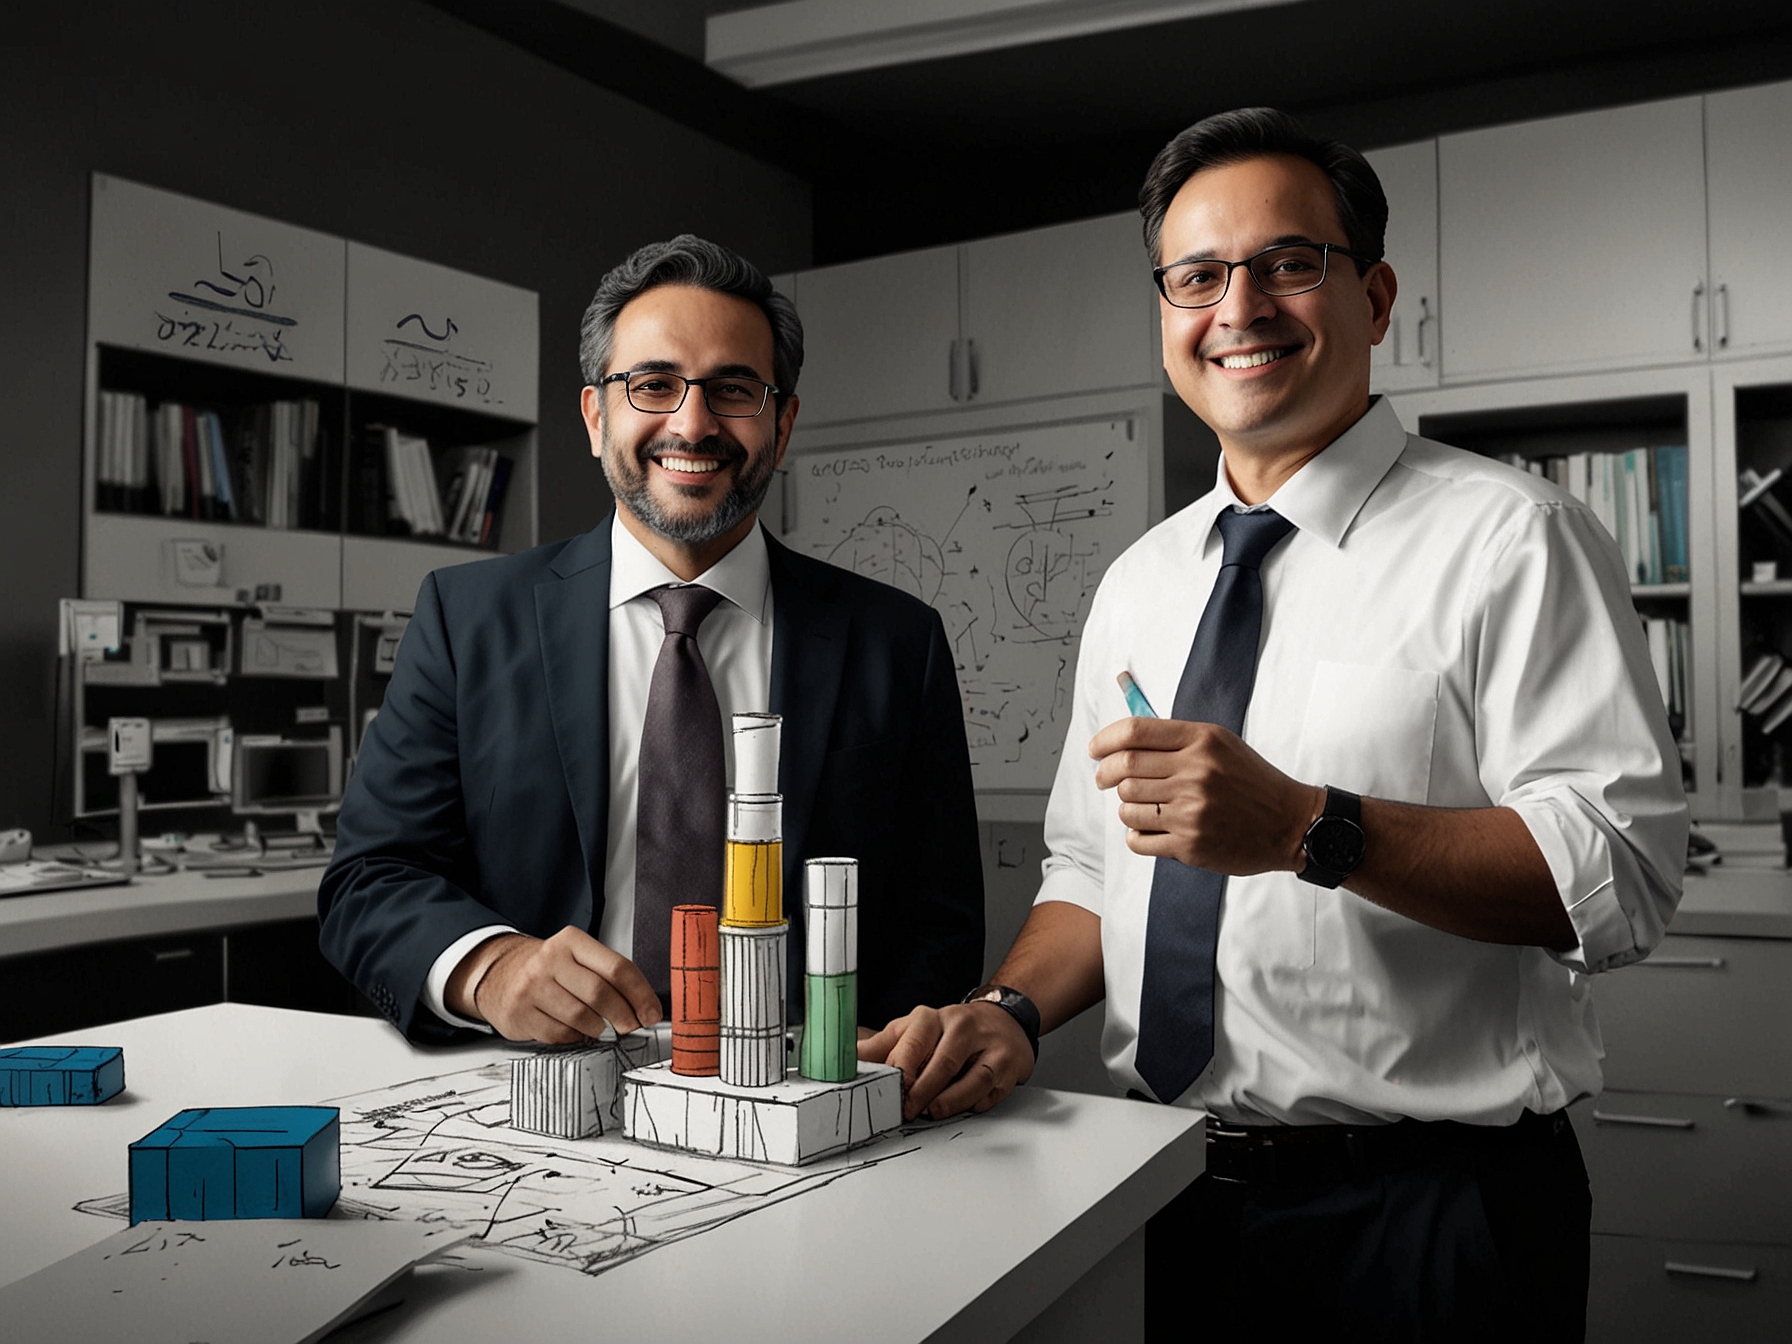 CEO Dr. Mehdi Kargar and CTO Dr. , leaders of Maxterial, celebrate the company's successful Series A funding round, which raised nearly $8 million for advancing material science technologies.